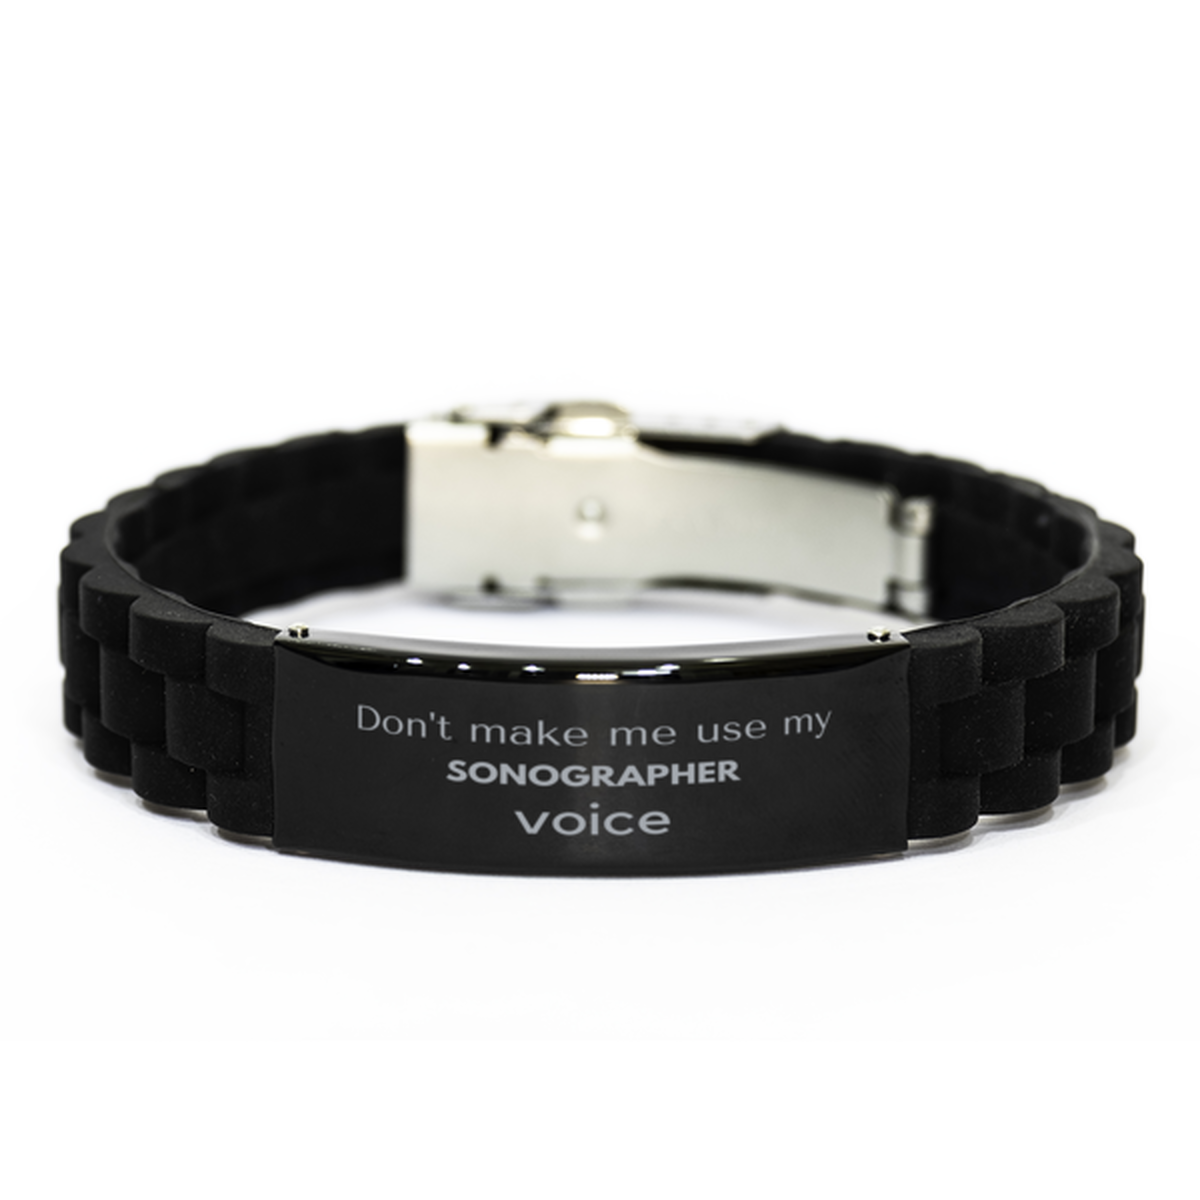 Don't make me use my Sonographer voice, Sarcasm Sonographer Gifts, Christmas Sonographer Black Glidelock Clasp Bracelet Birthday Unique Gifts For Sonographer Coworkers, Men, Women, Colleague, Friends